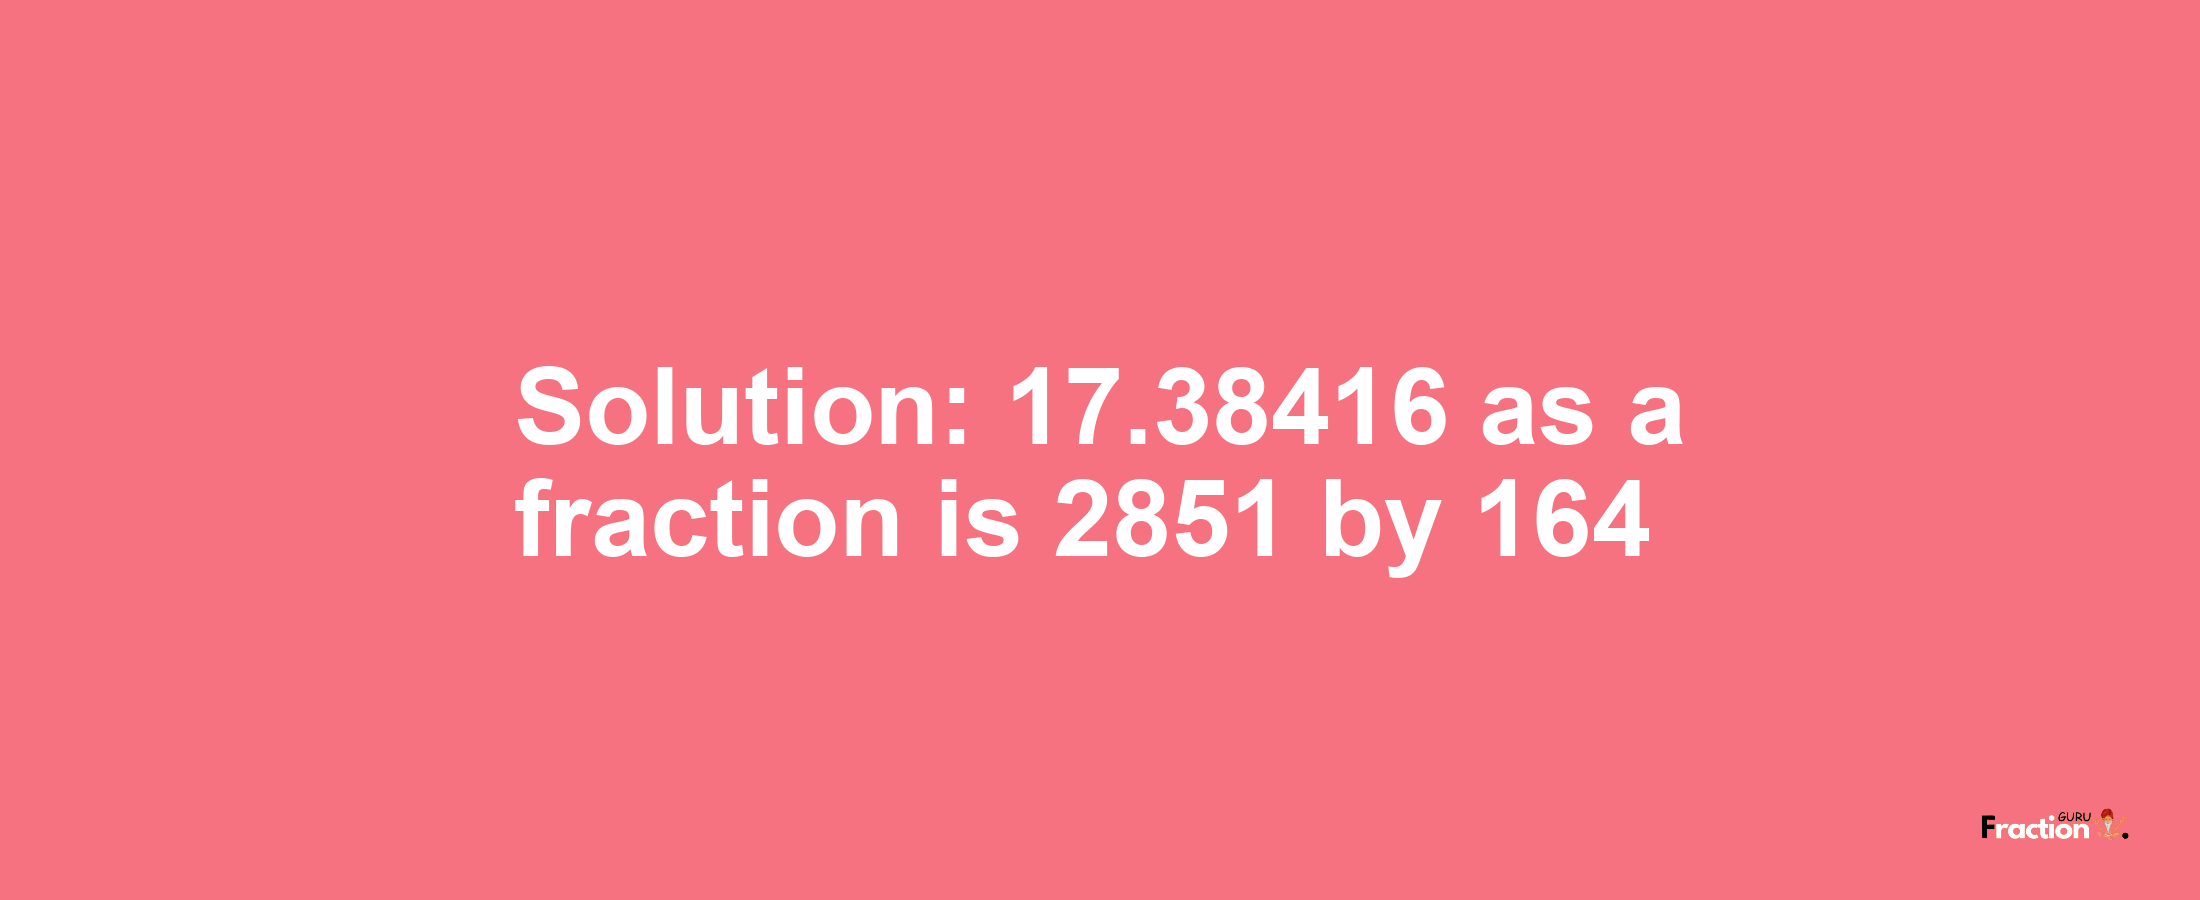 Solution:17.38416 as a fraction is 2851/164